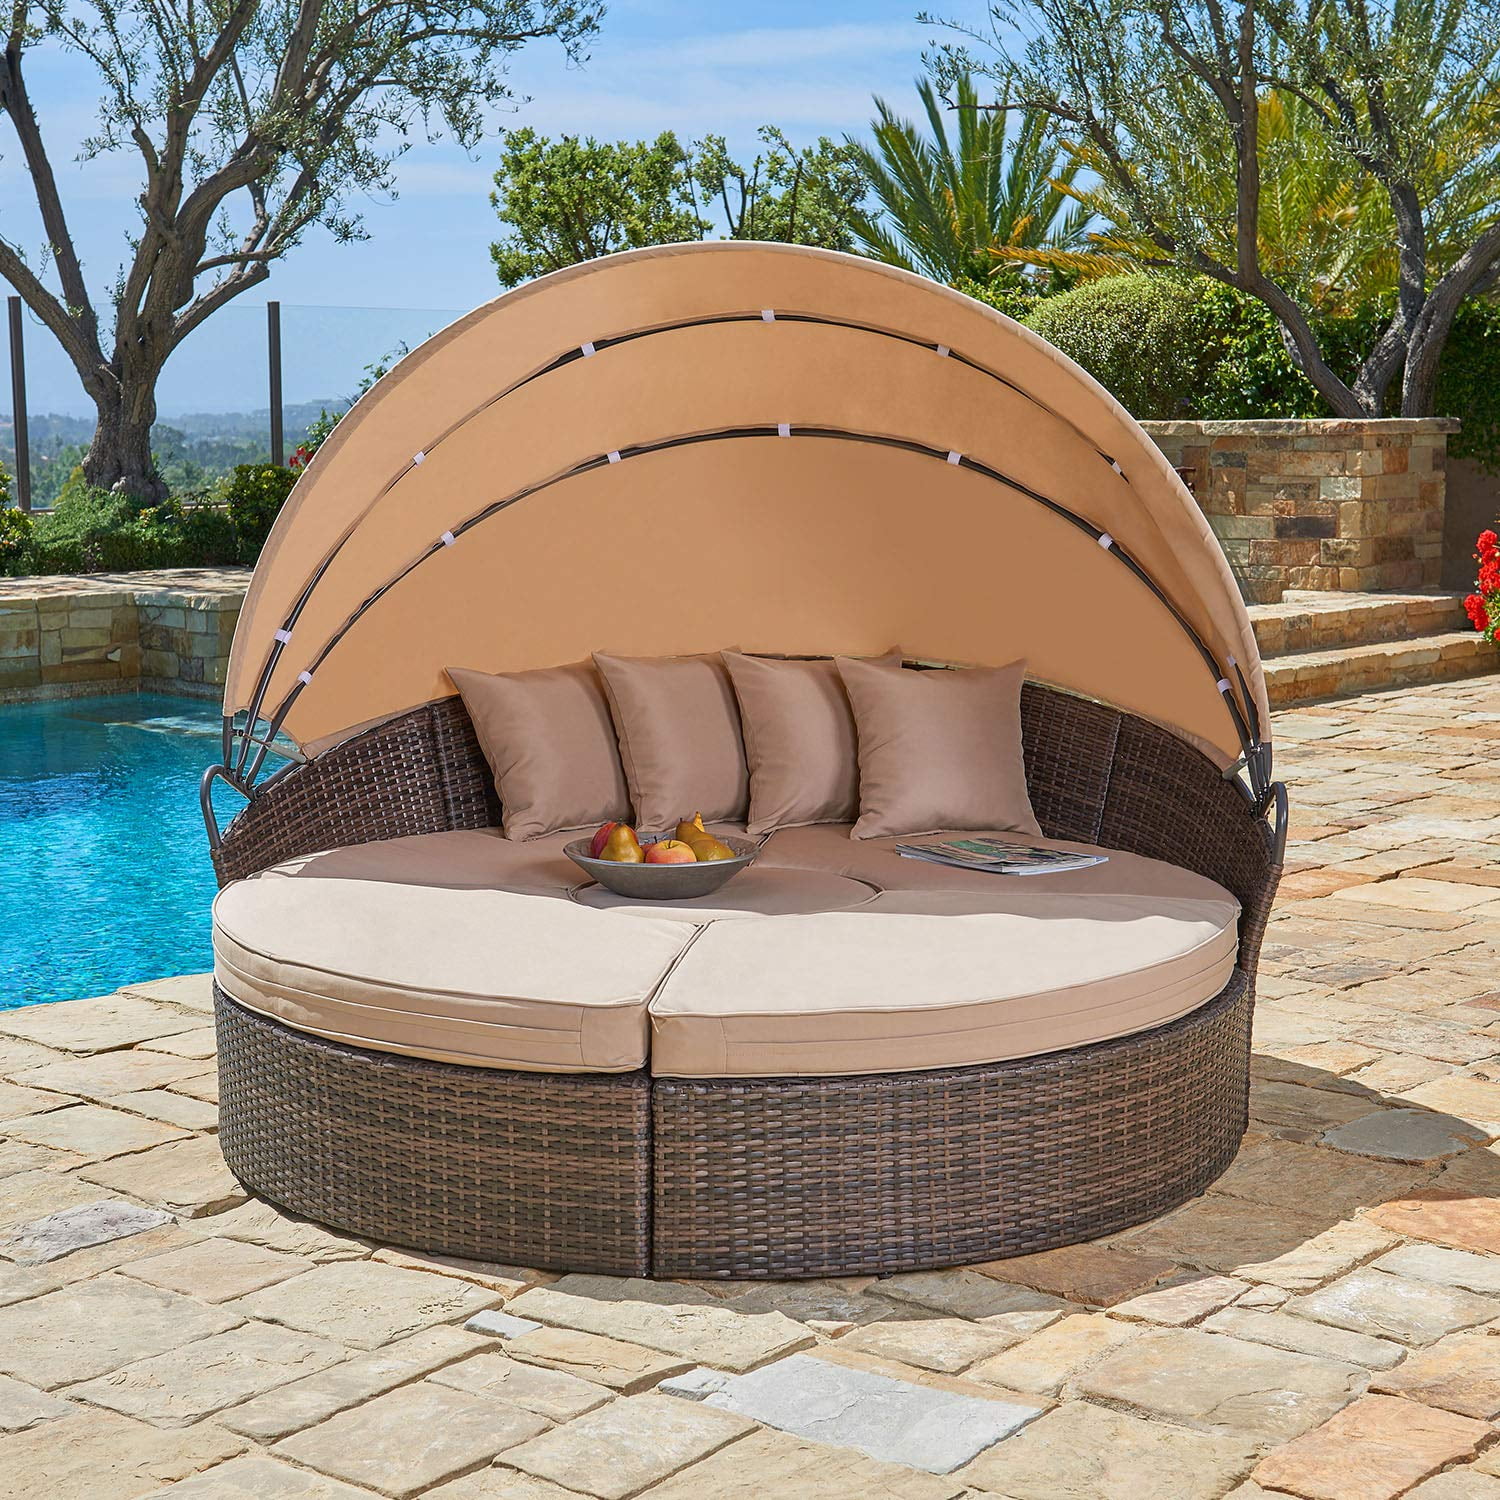 Outdoor Round Daybed With Canopy Large Newport Round Outdoor Wicker Daybed Without Canopy